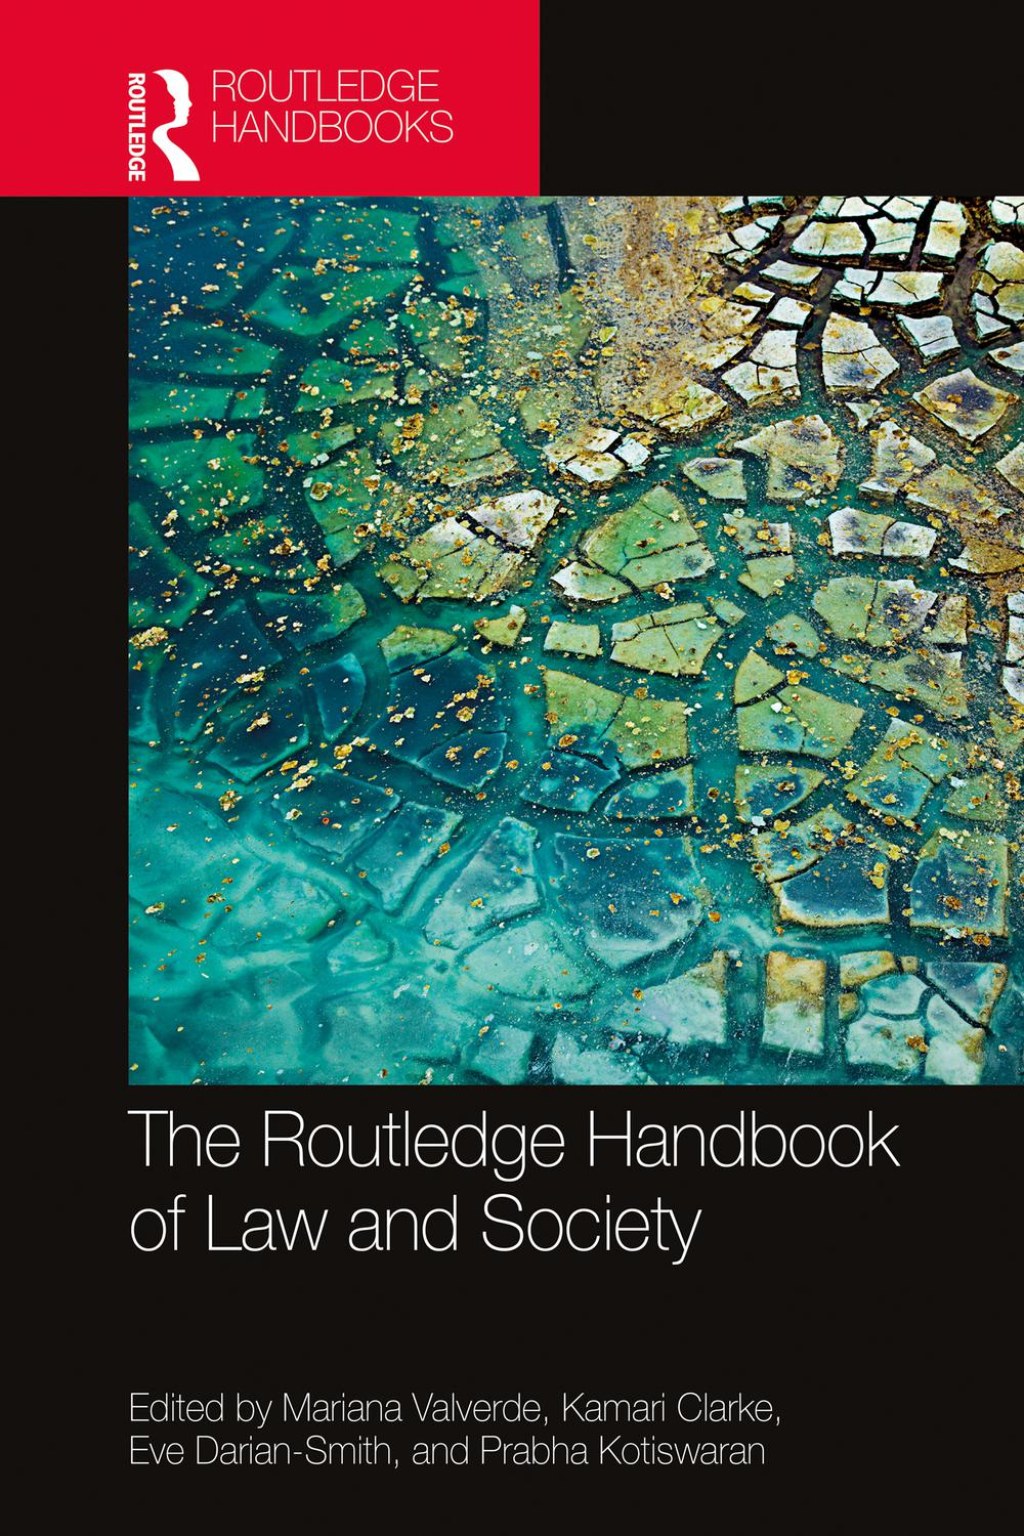 Picture of: PDF] The Routledge Handbook of Law and Society by Mariana Valverde